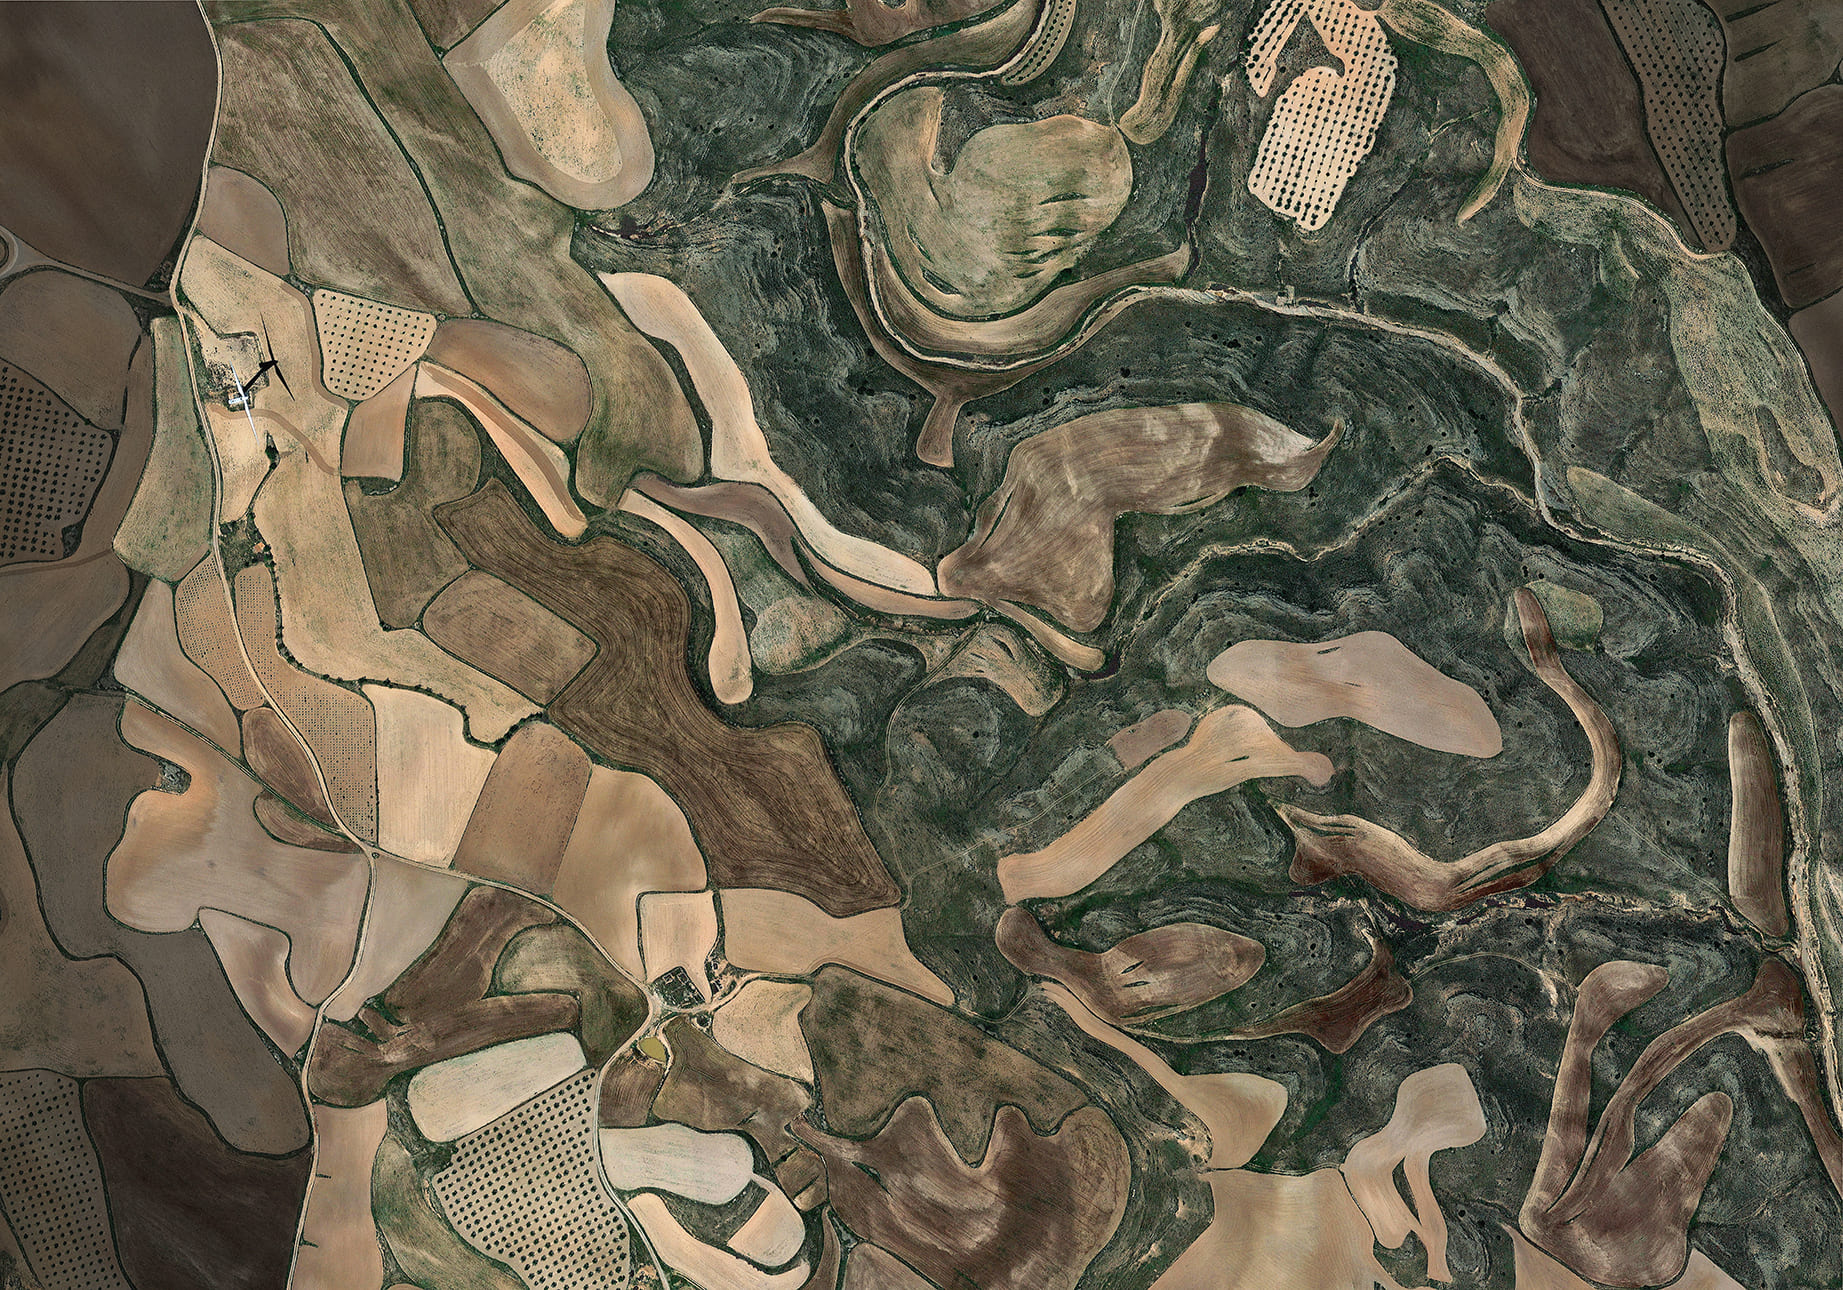 EARTH PORTRAIT 48 SPAIN (WITH GRAY MASK), 2020, SATELLITE PHOTOGRAPHY, CM 84×120, limited edition 9